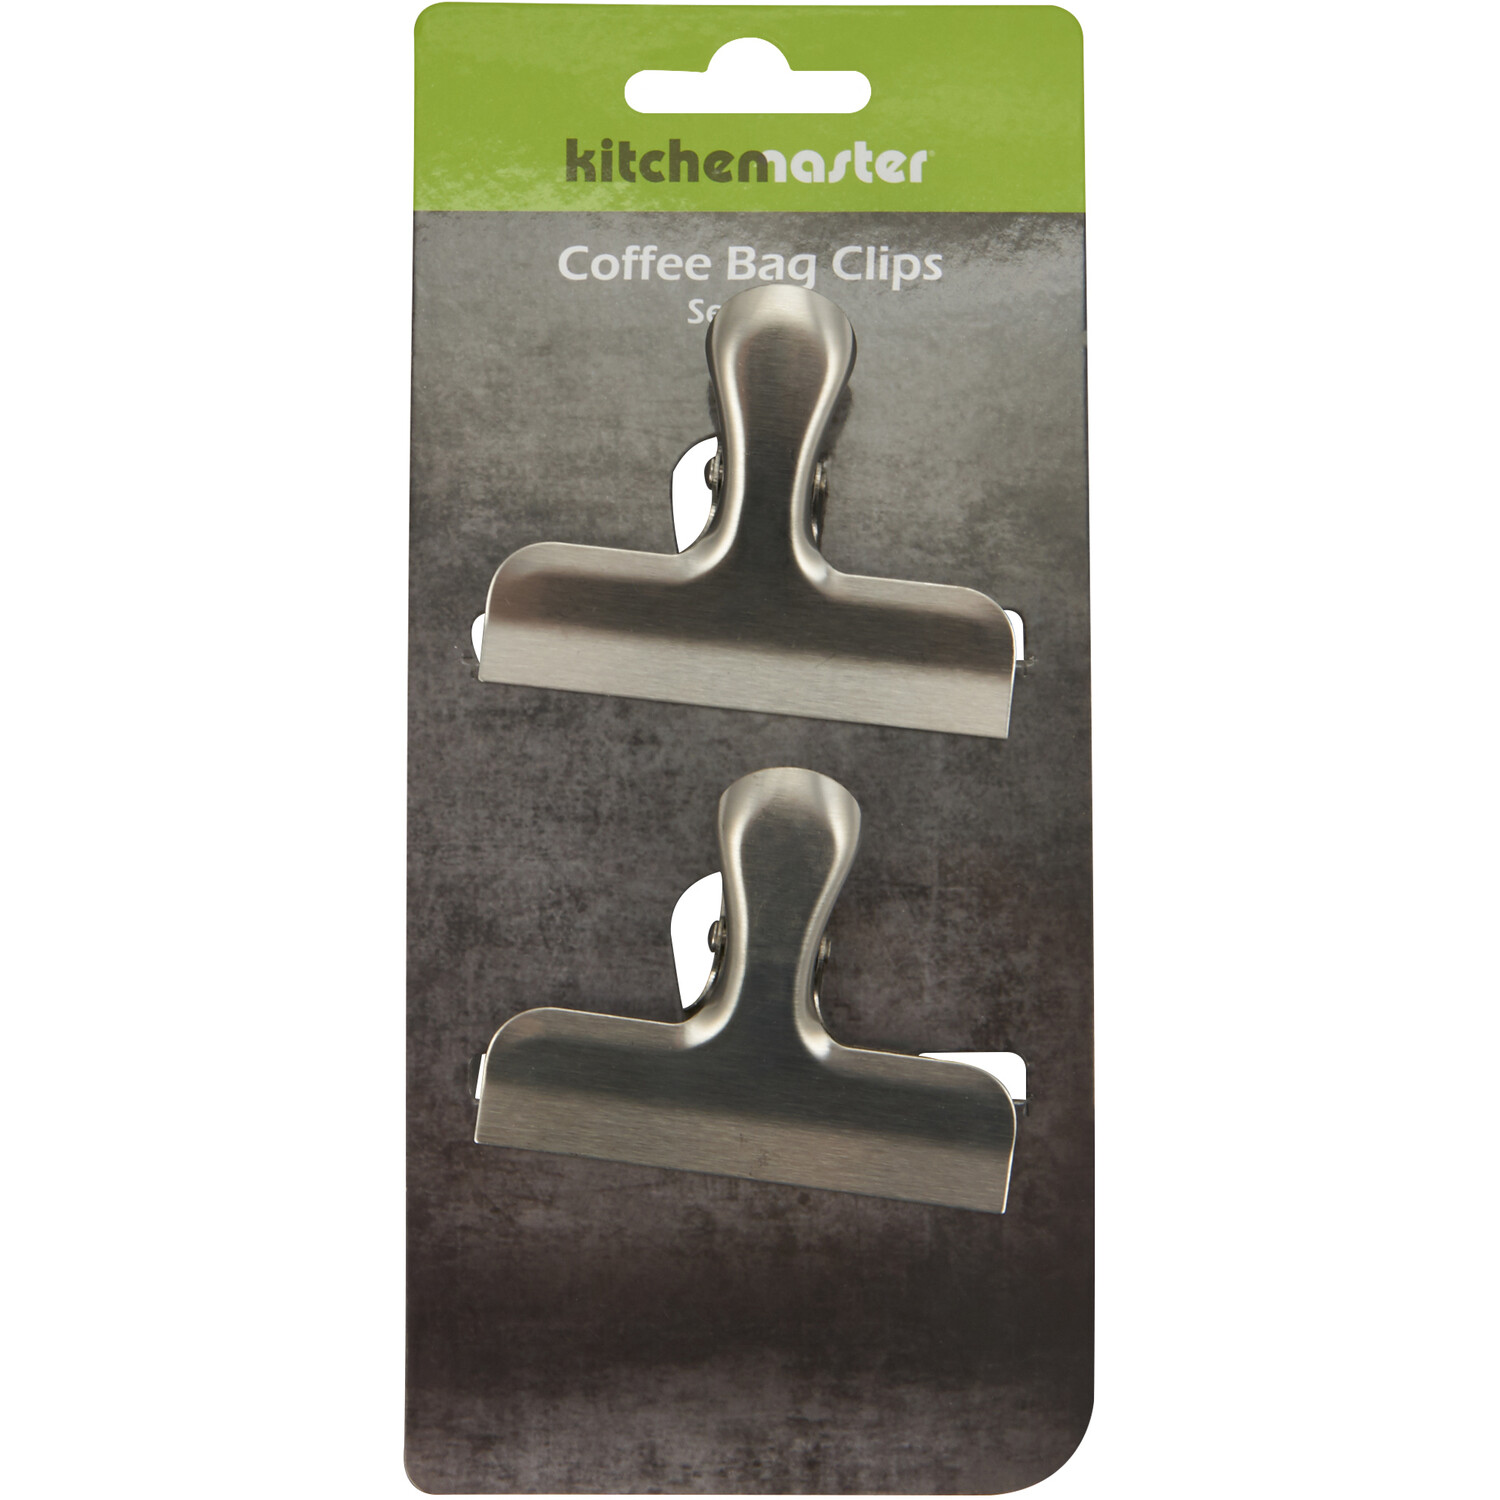 Pack of 2 Coffee Bag Clips Image 1